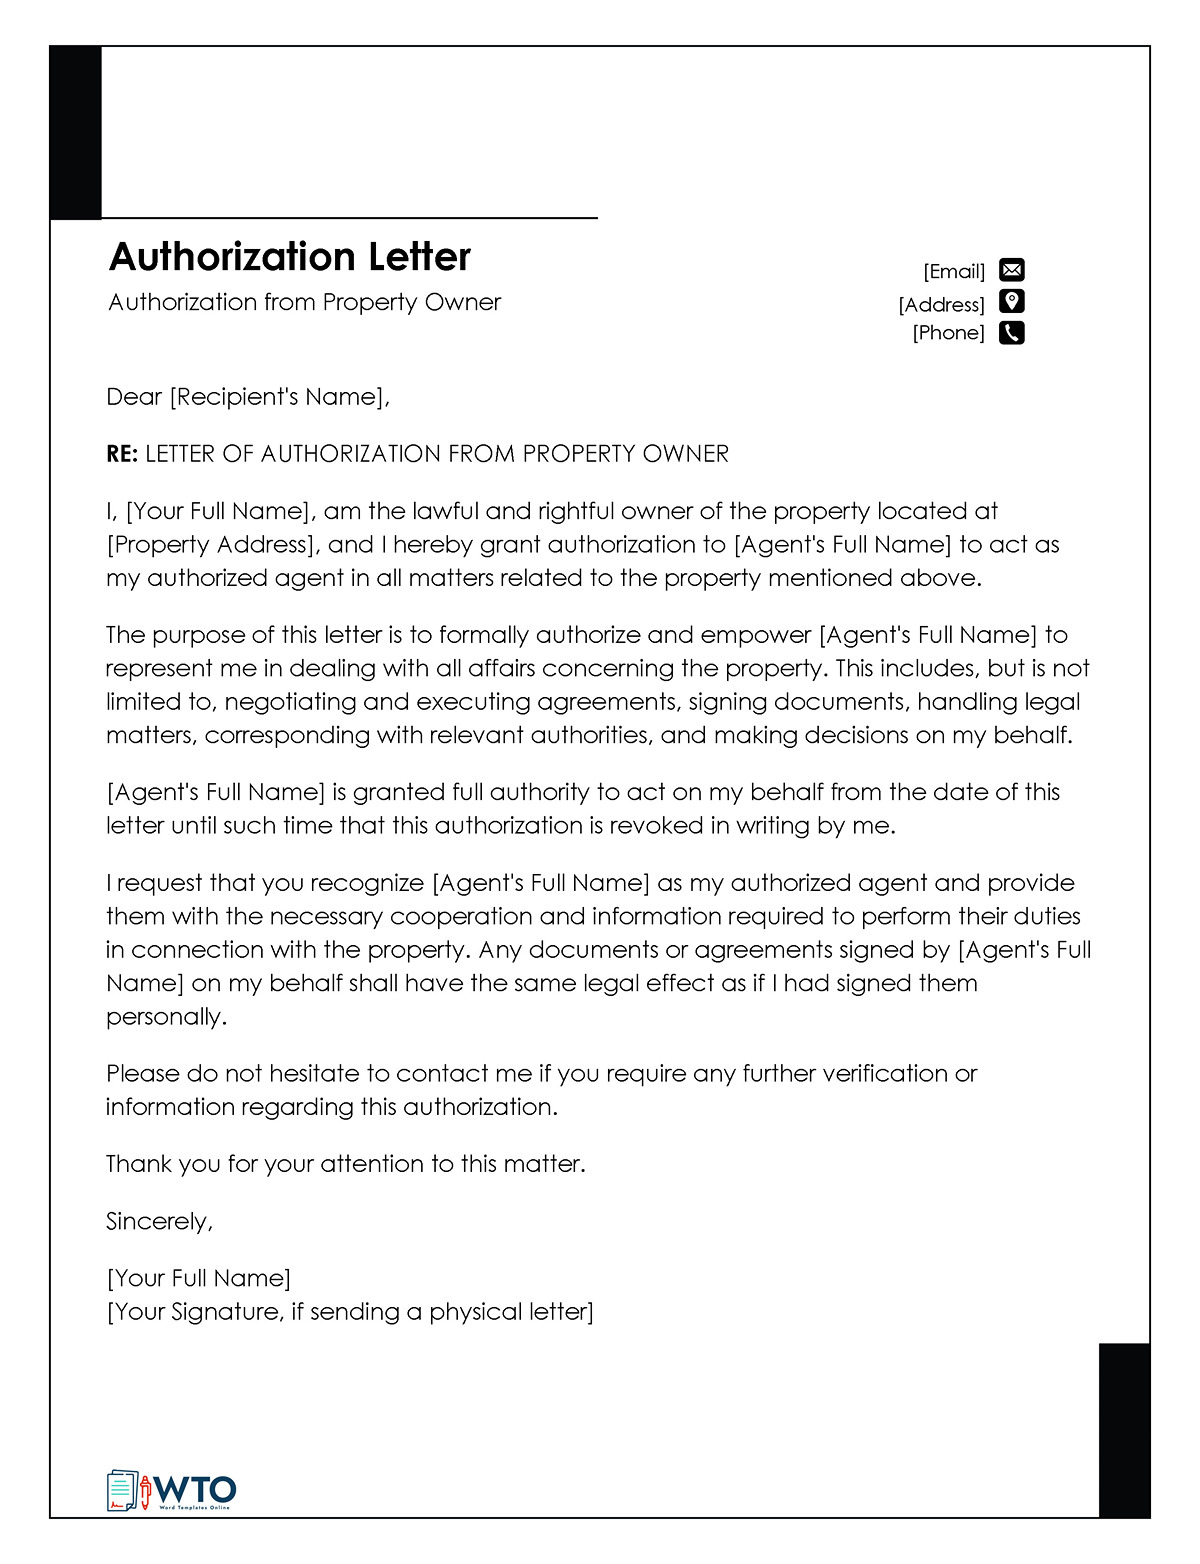 Template Letter of Authorization from Property Owner-Downloadable